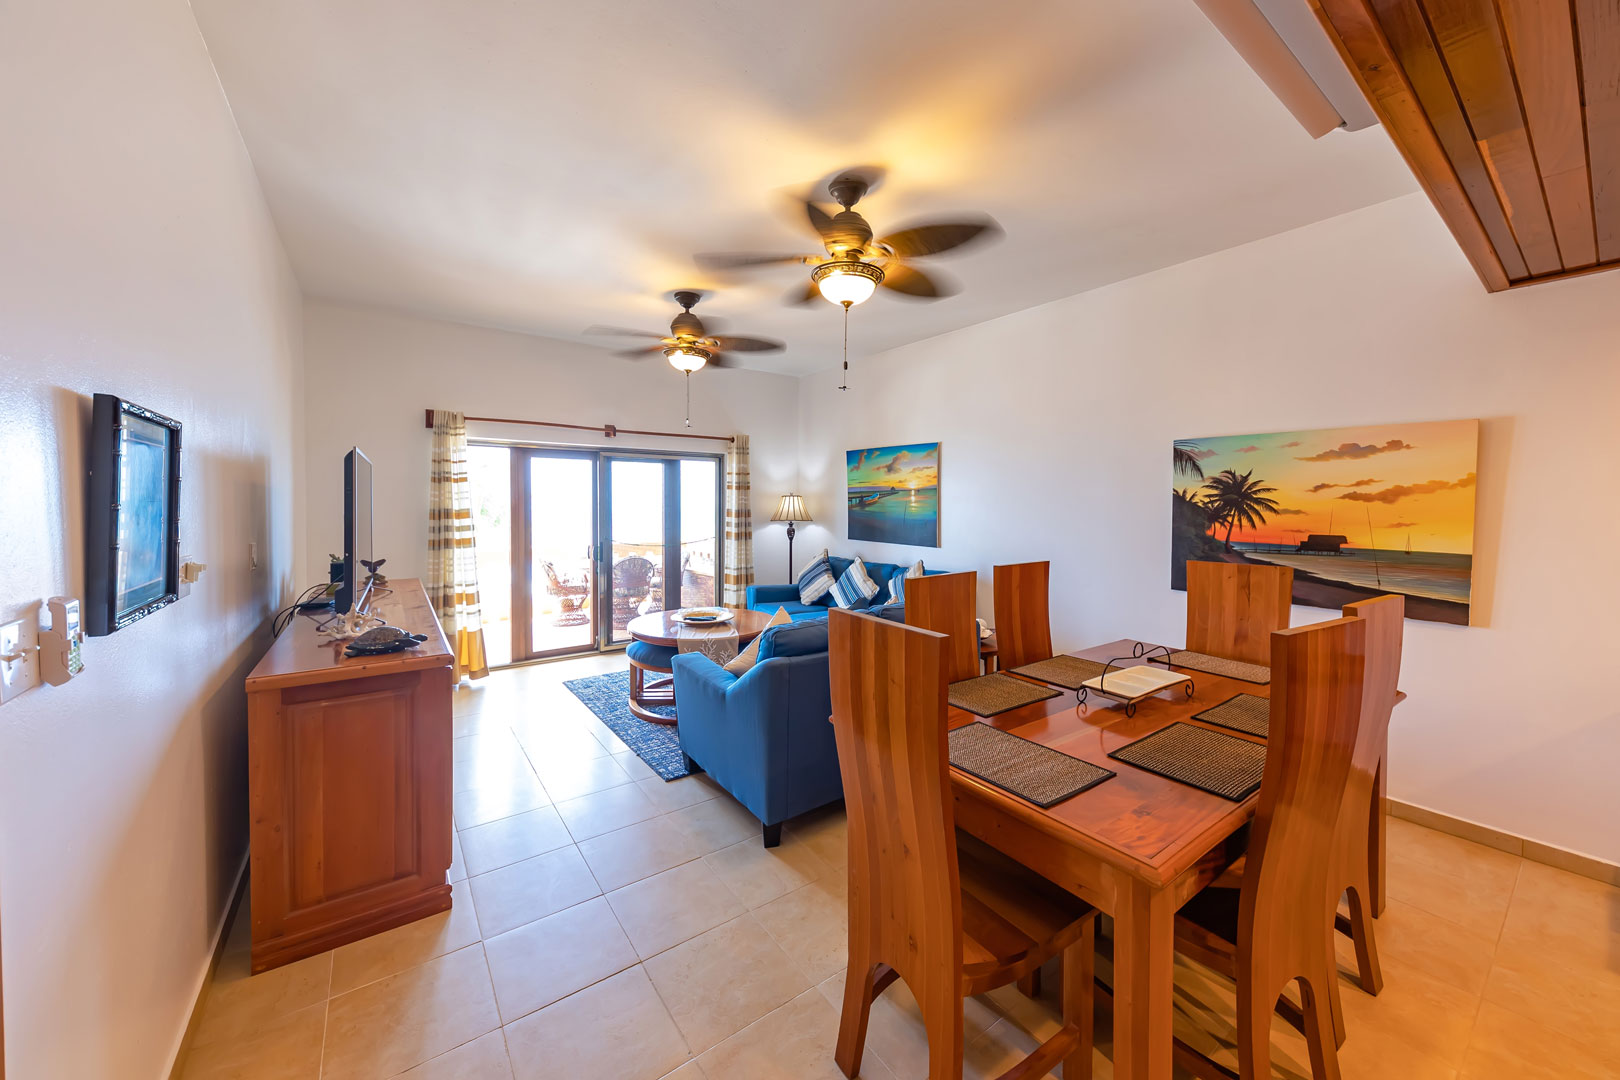 Allan-Fries-Hol-Chan-Condo-Unit-3A-Photos---Ambergris-Caye-Belize---SELECTIONS---17webopd